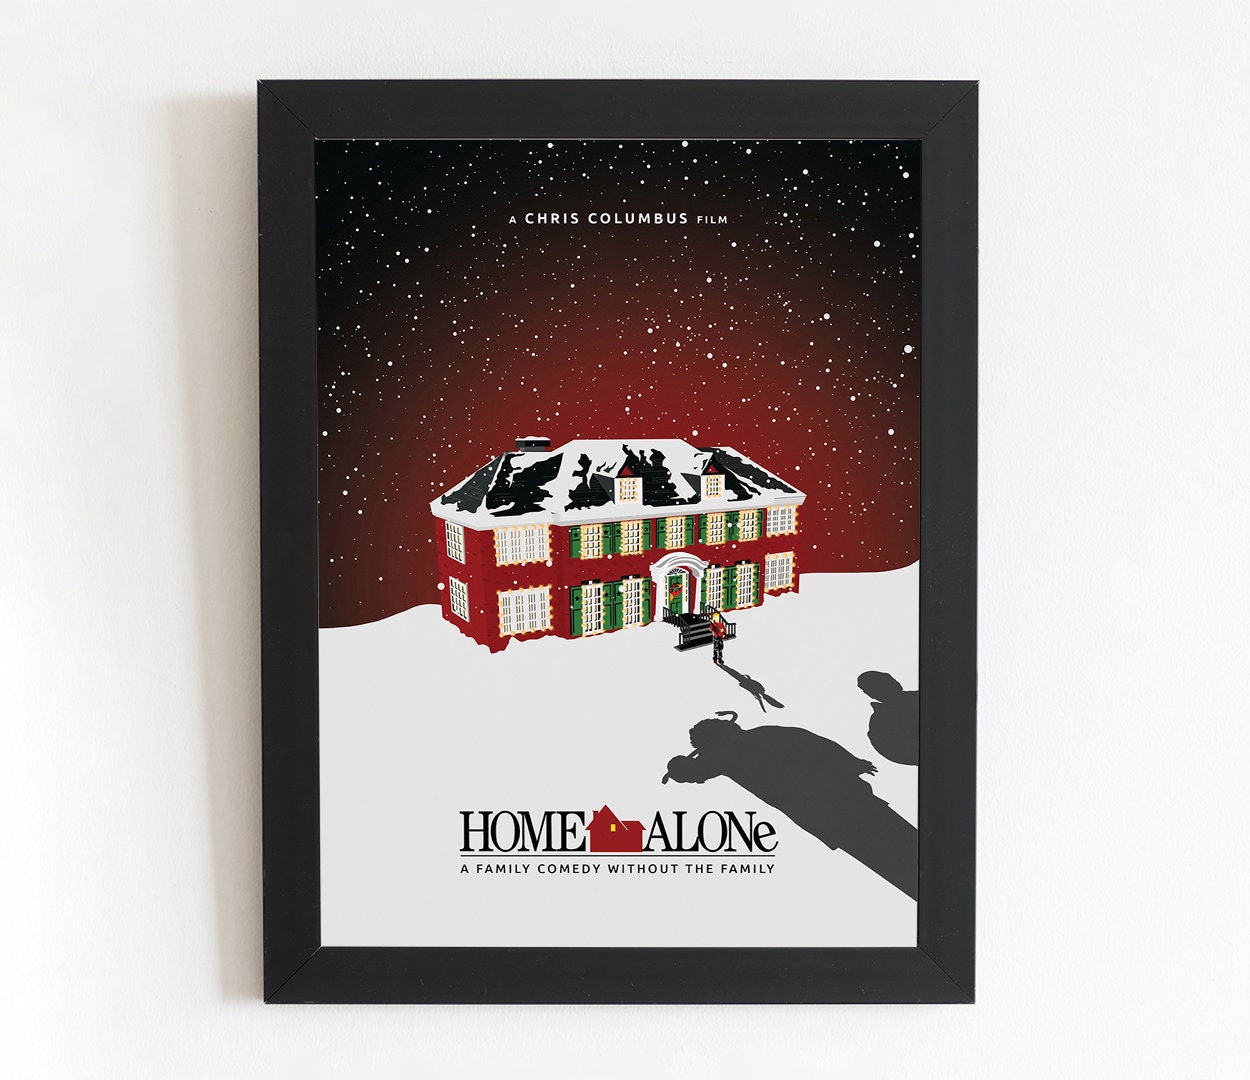 10 Things I Hate About You Poster, Movie Poster, Heath Ledger, American  Movie, 1990s Minimalist Movie Poster, Unique Art Print, Shakespeare 